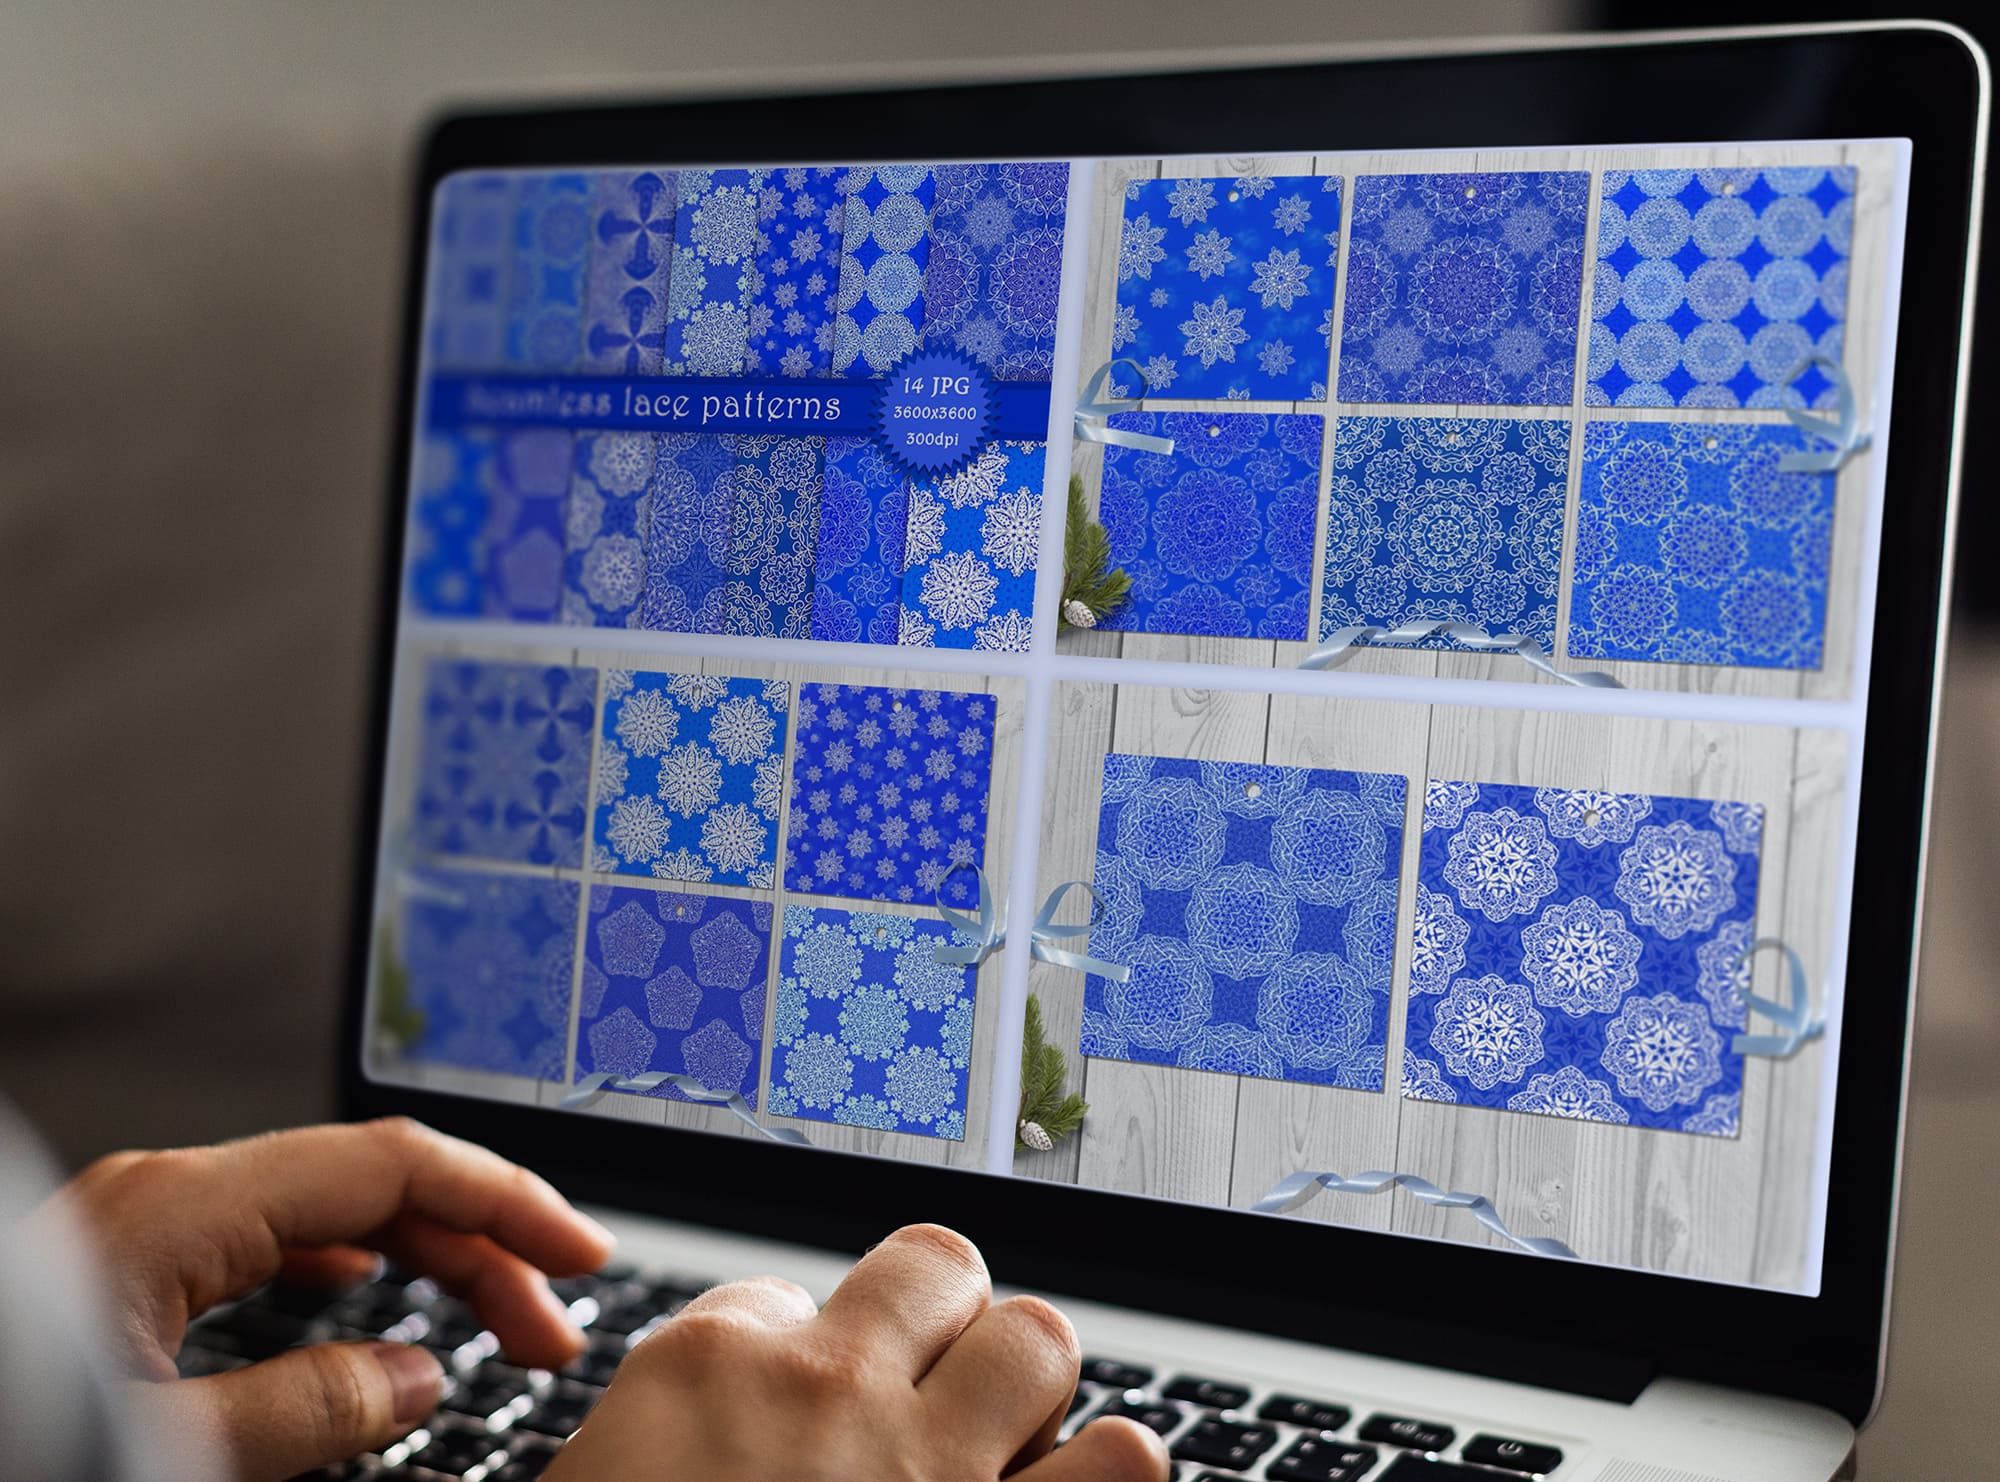 A set of 4 different white-blue seamless lace patterns on the macbook mockup.